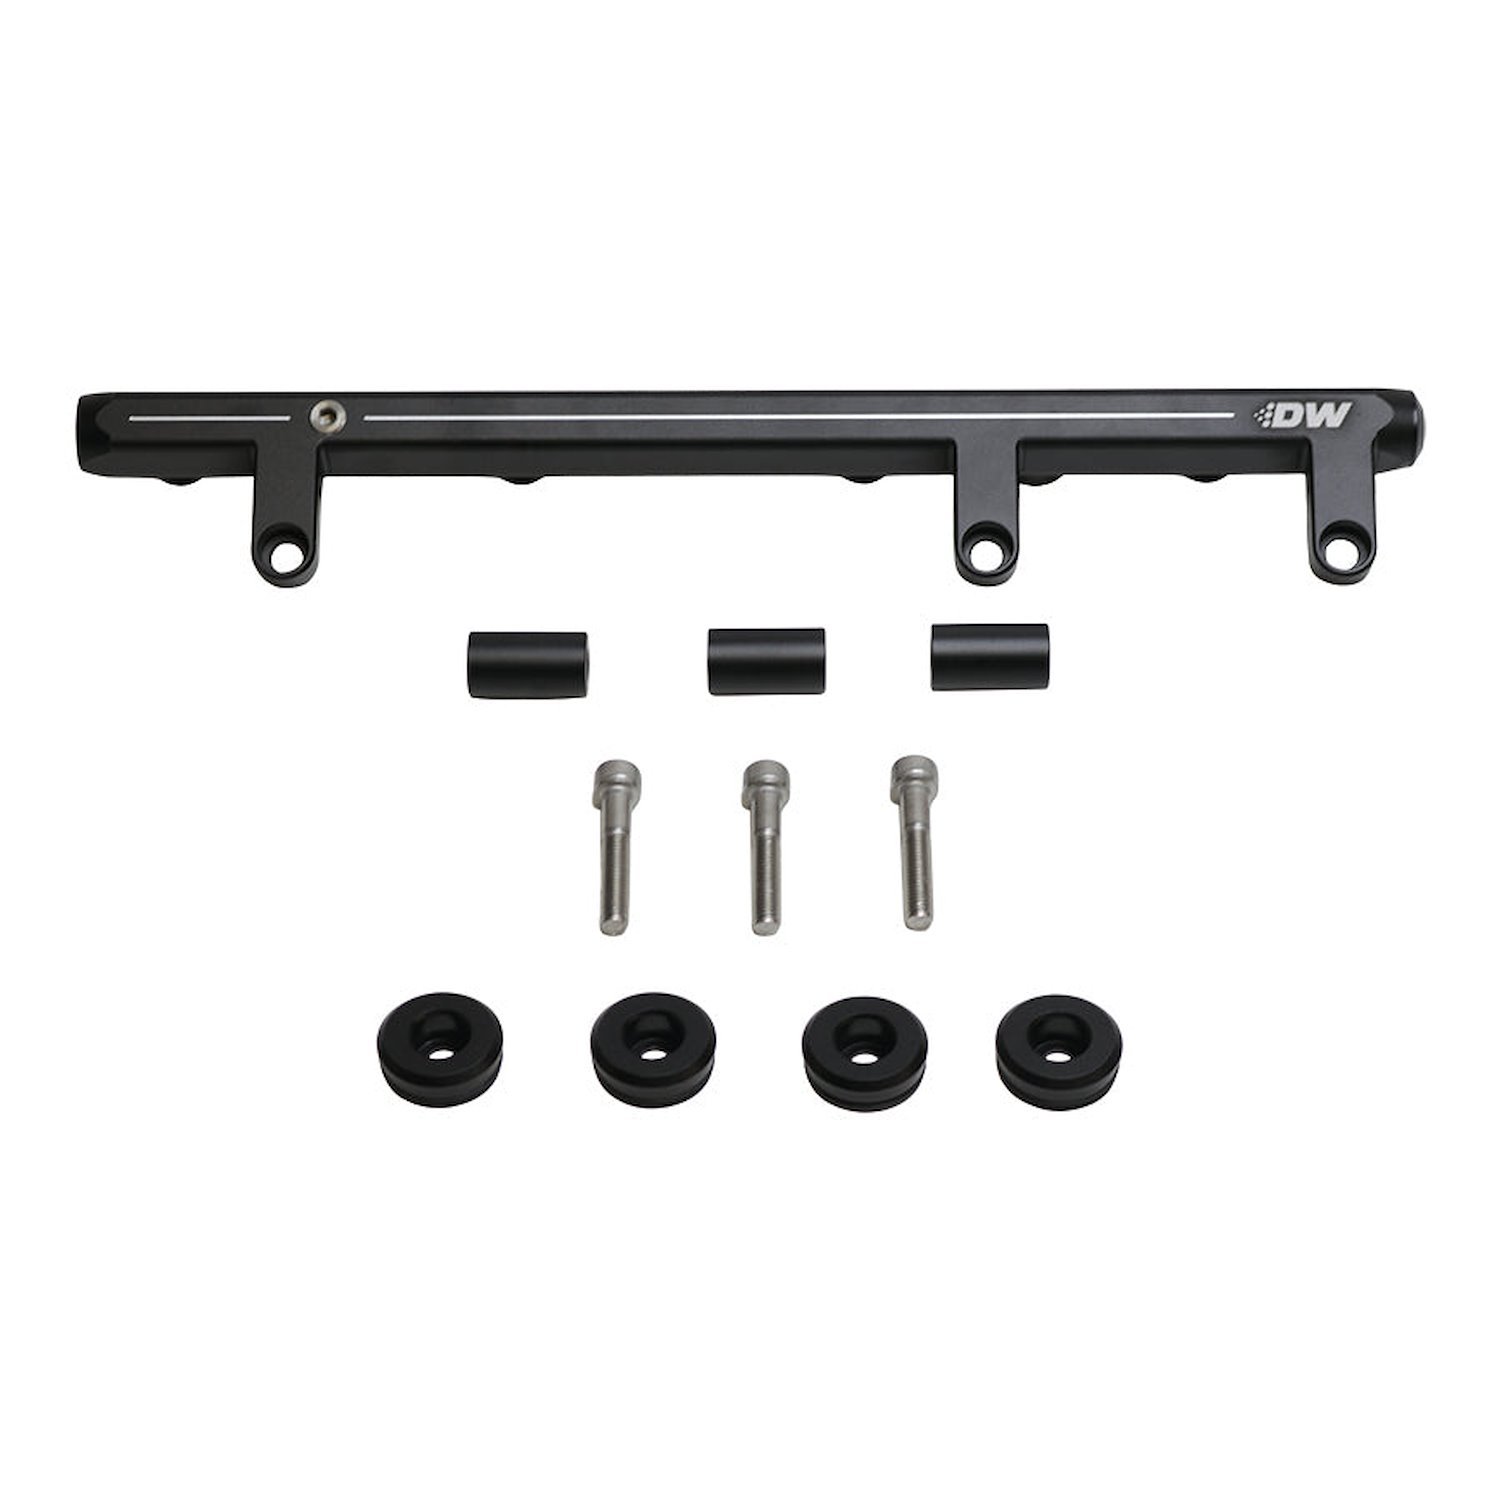 7800 Nissan SR20 S13 Top Feed Conversion Fuel Rail for 1991-97 Nissan 180SX 1991-93 Nissan Silvia 1989-93 Nissan 240SX